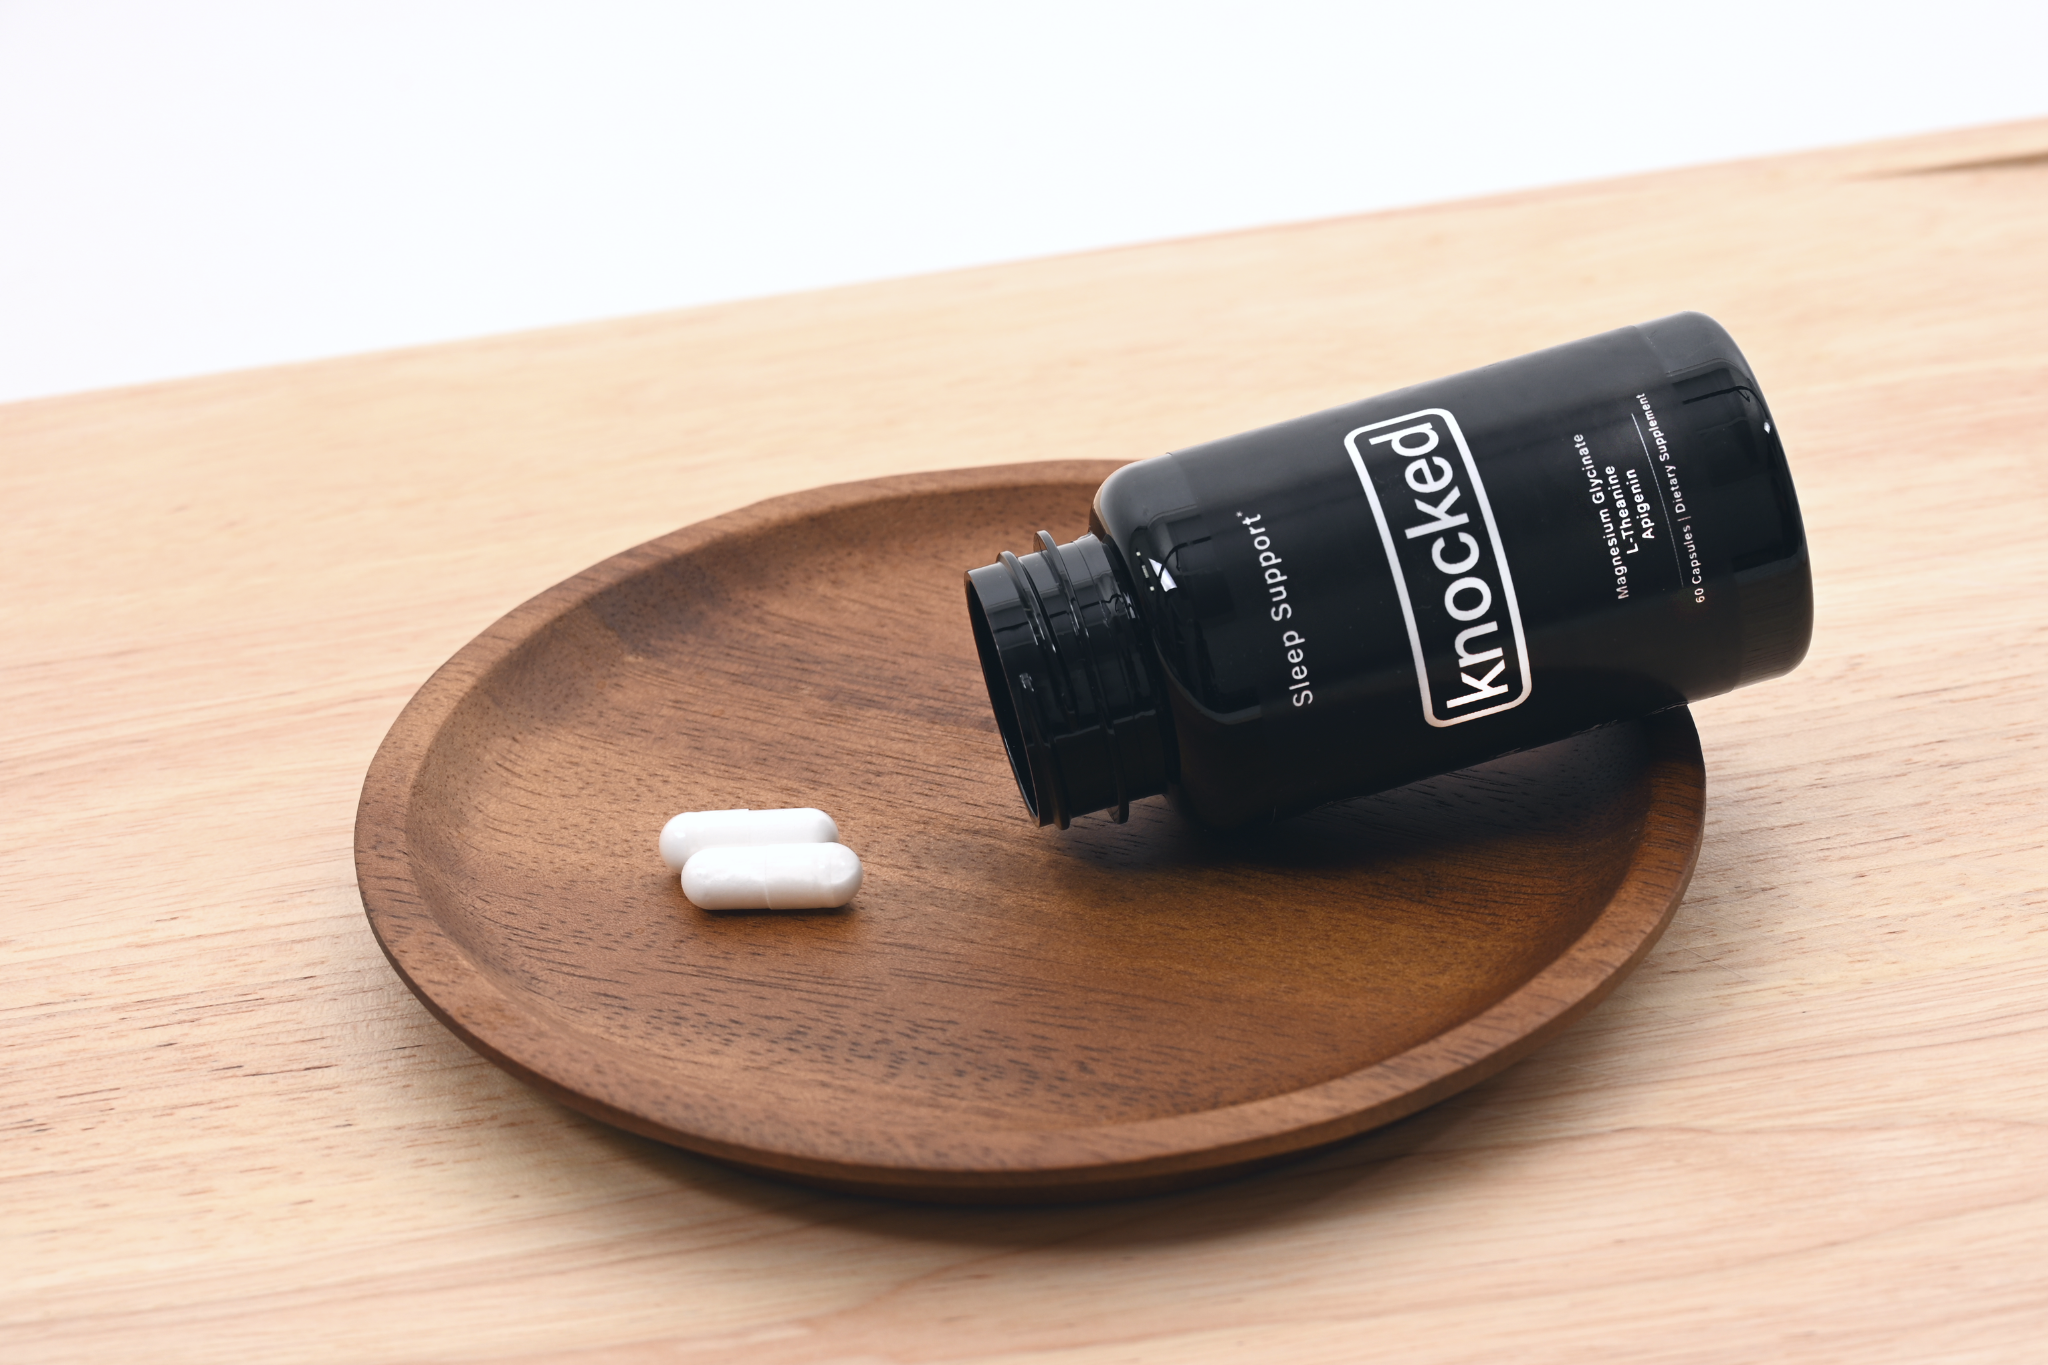 The Ins and Outs of Knocked: Understanding What to Expect When Taking Knocked Supplements